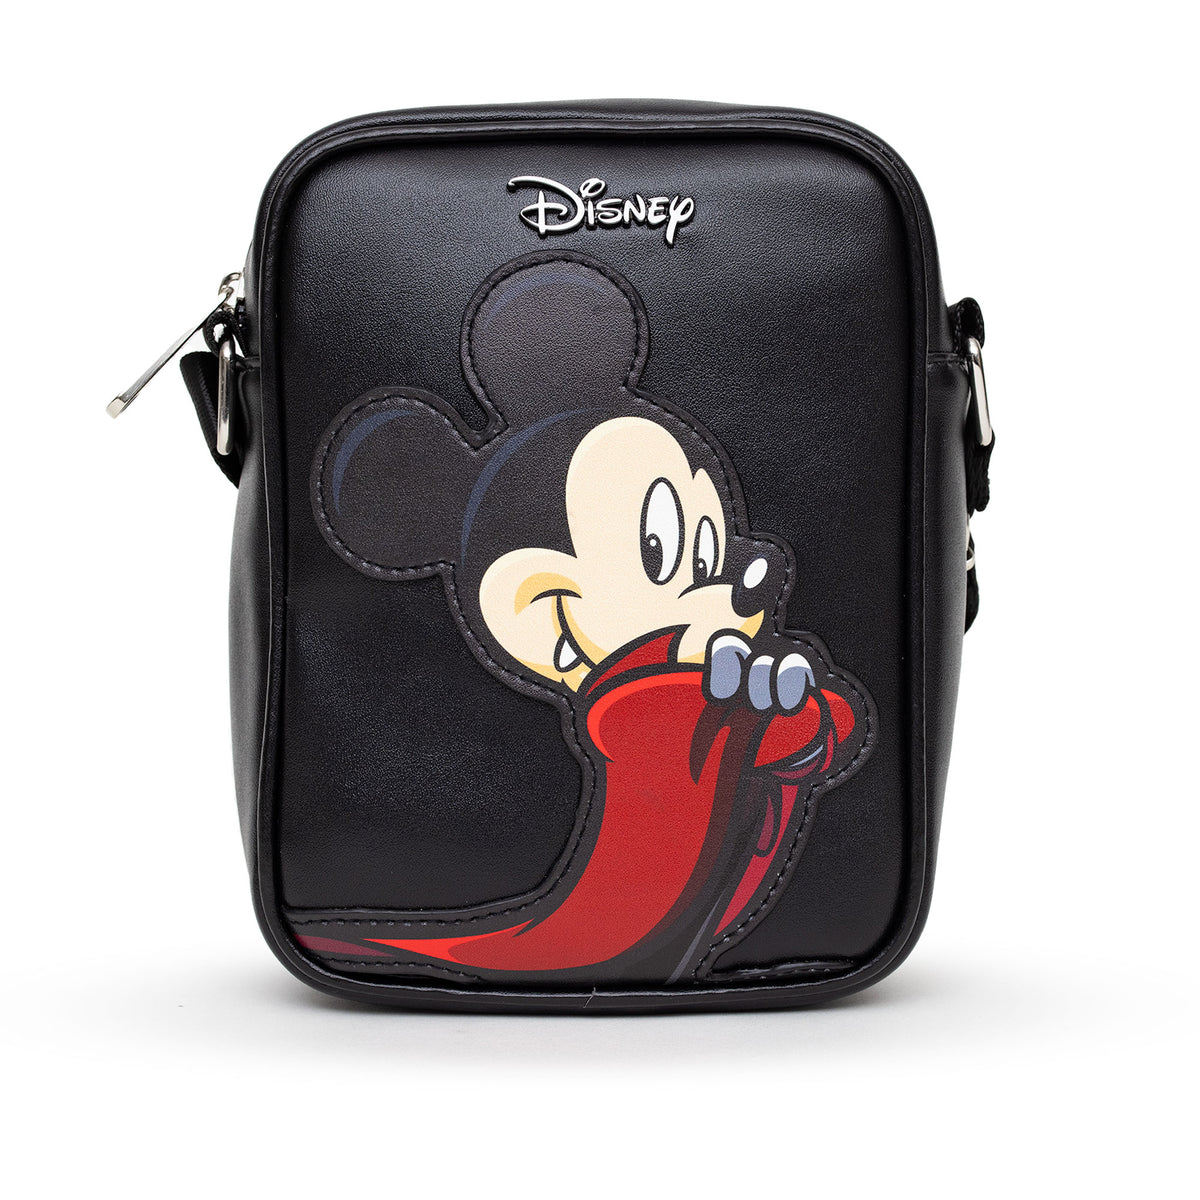 New Mickey Mouse Fine Leather Handbag Collection | Bags, Studded backpack,  Genuine leather bags